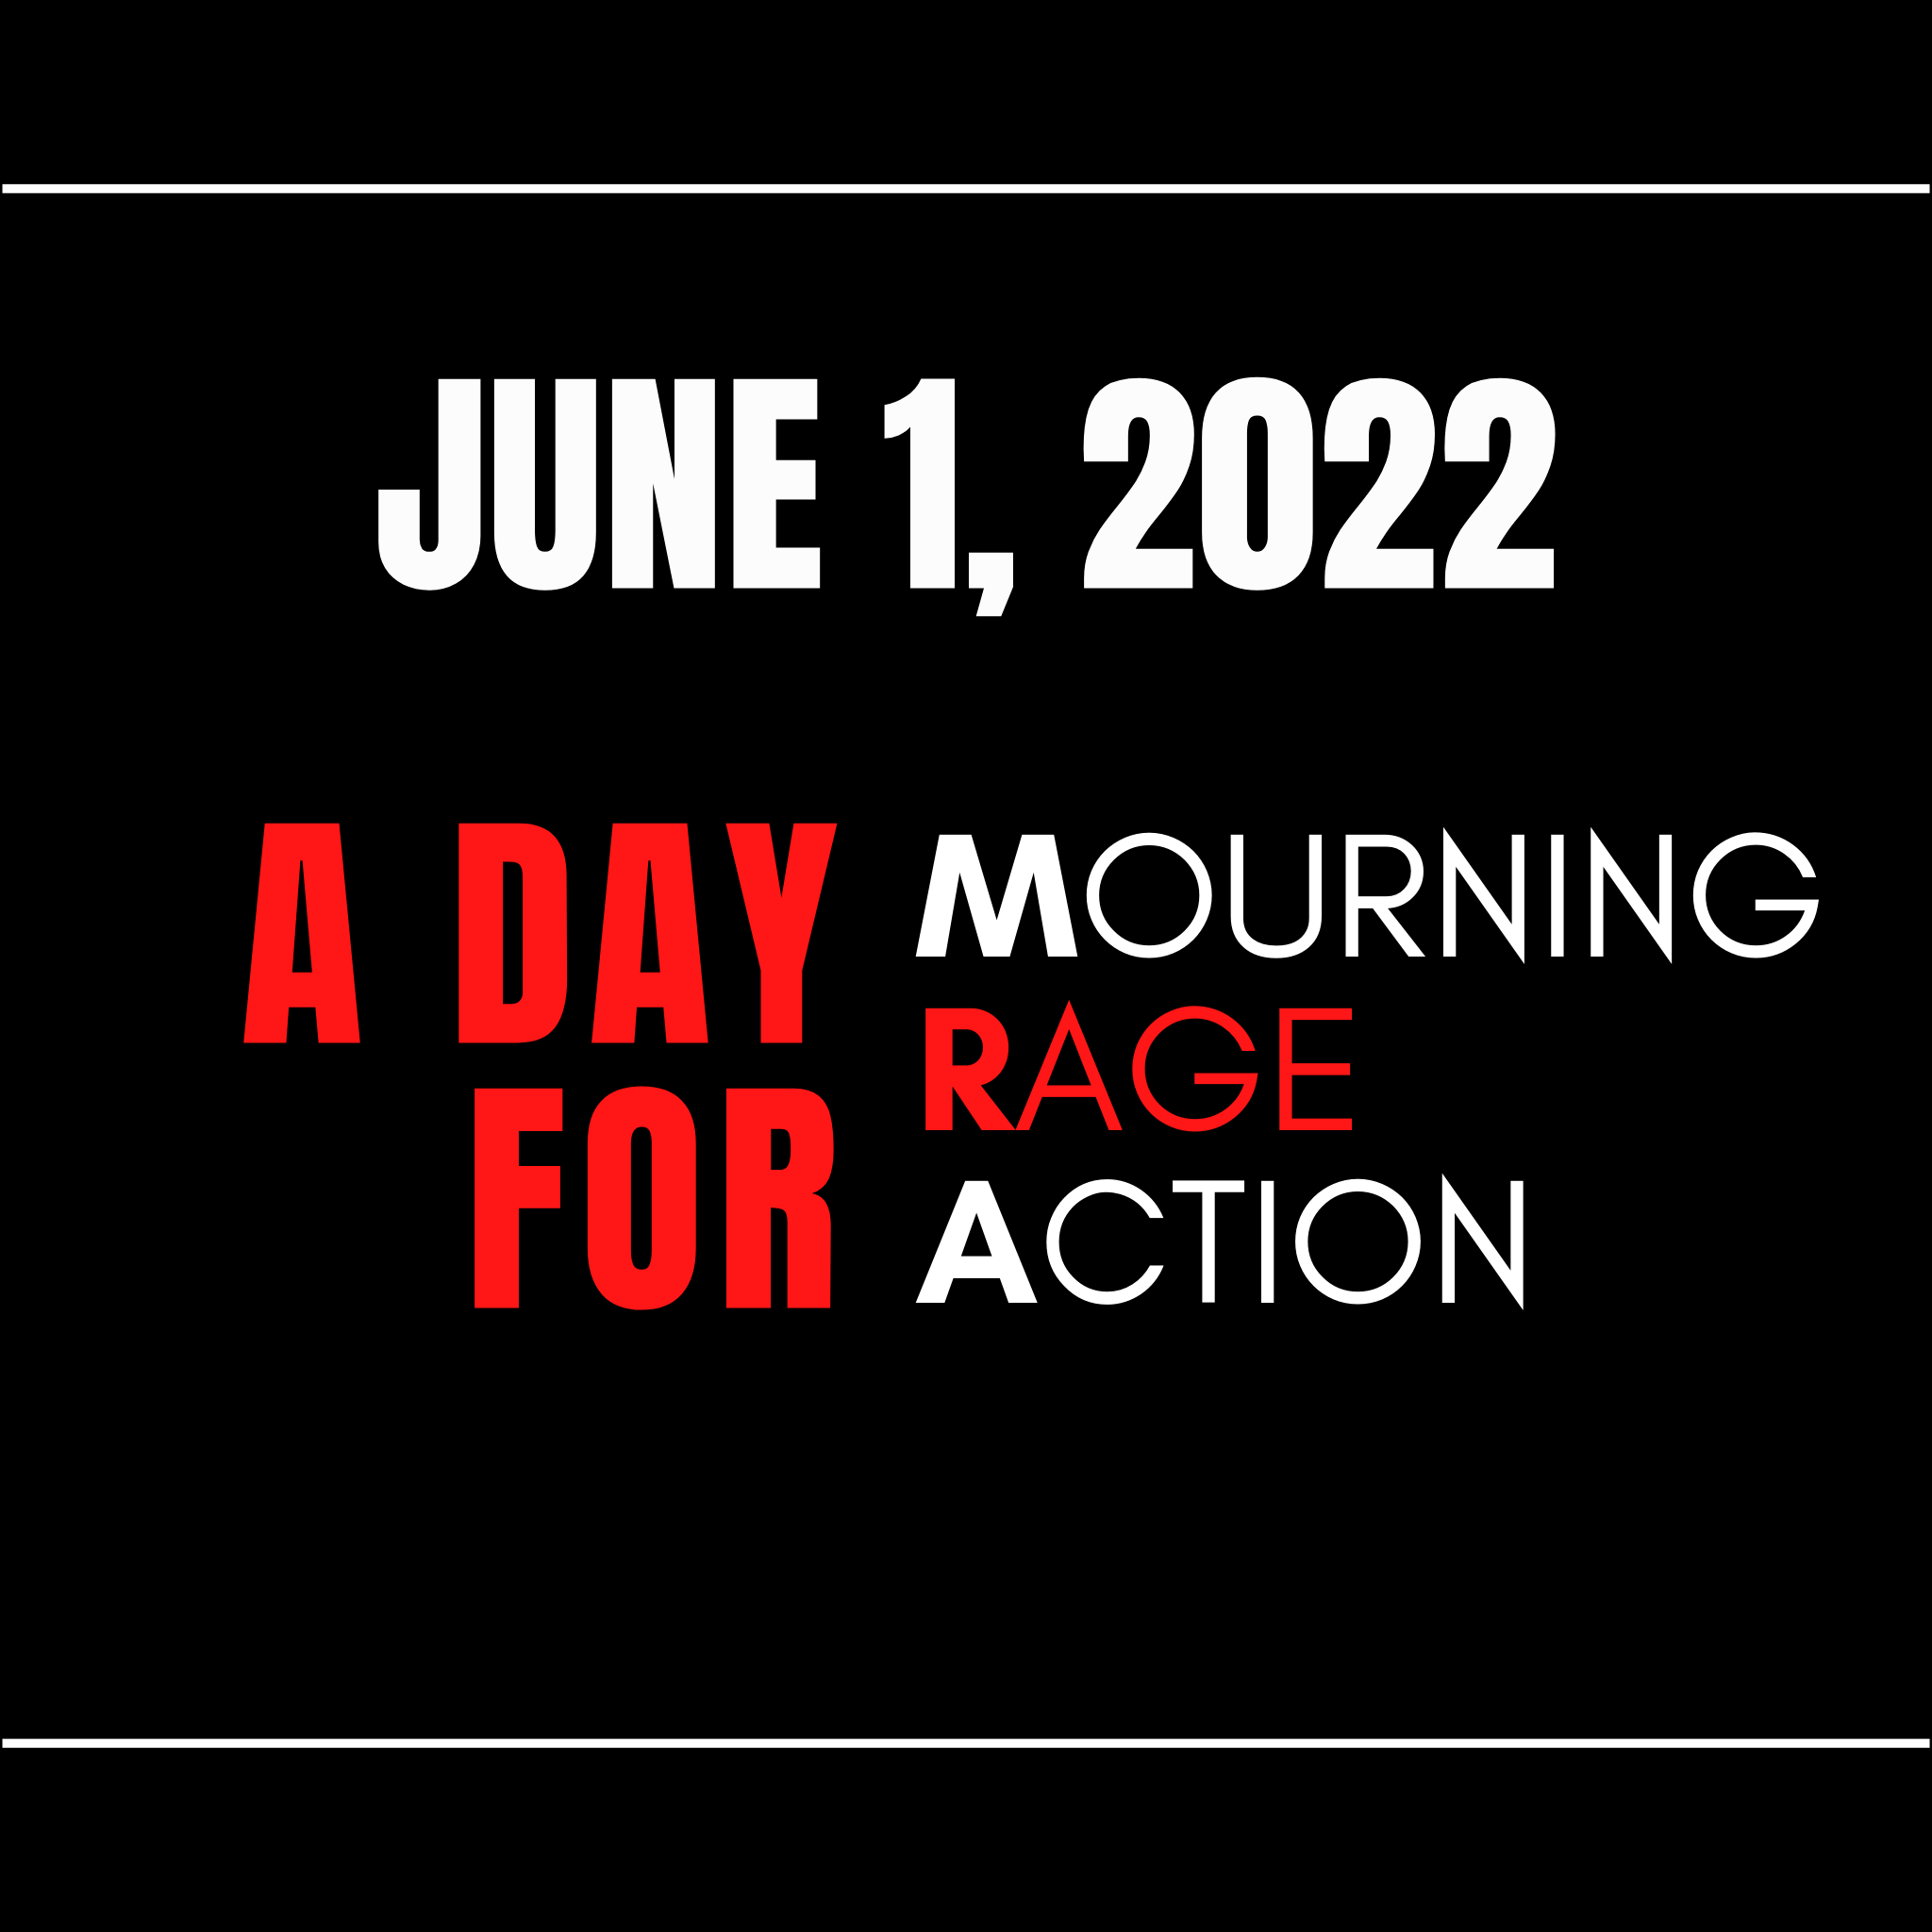 Day of Action for Mourning, Rage and Action